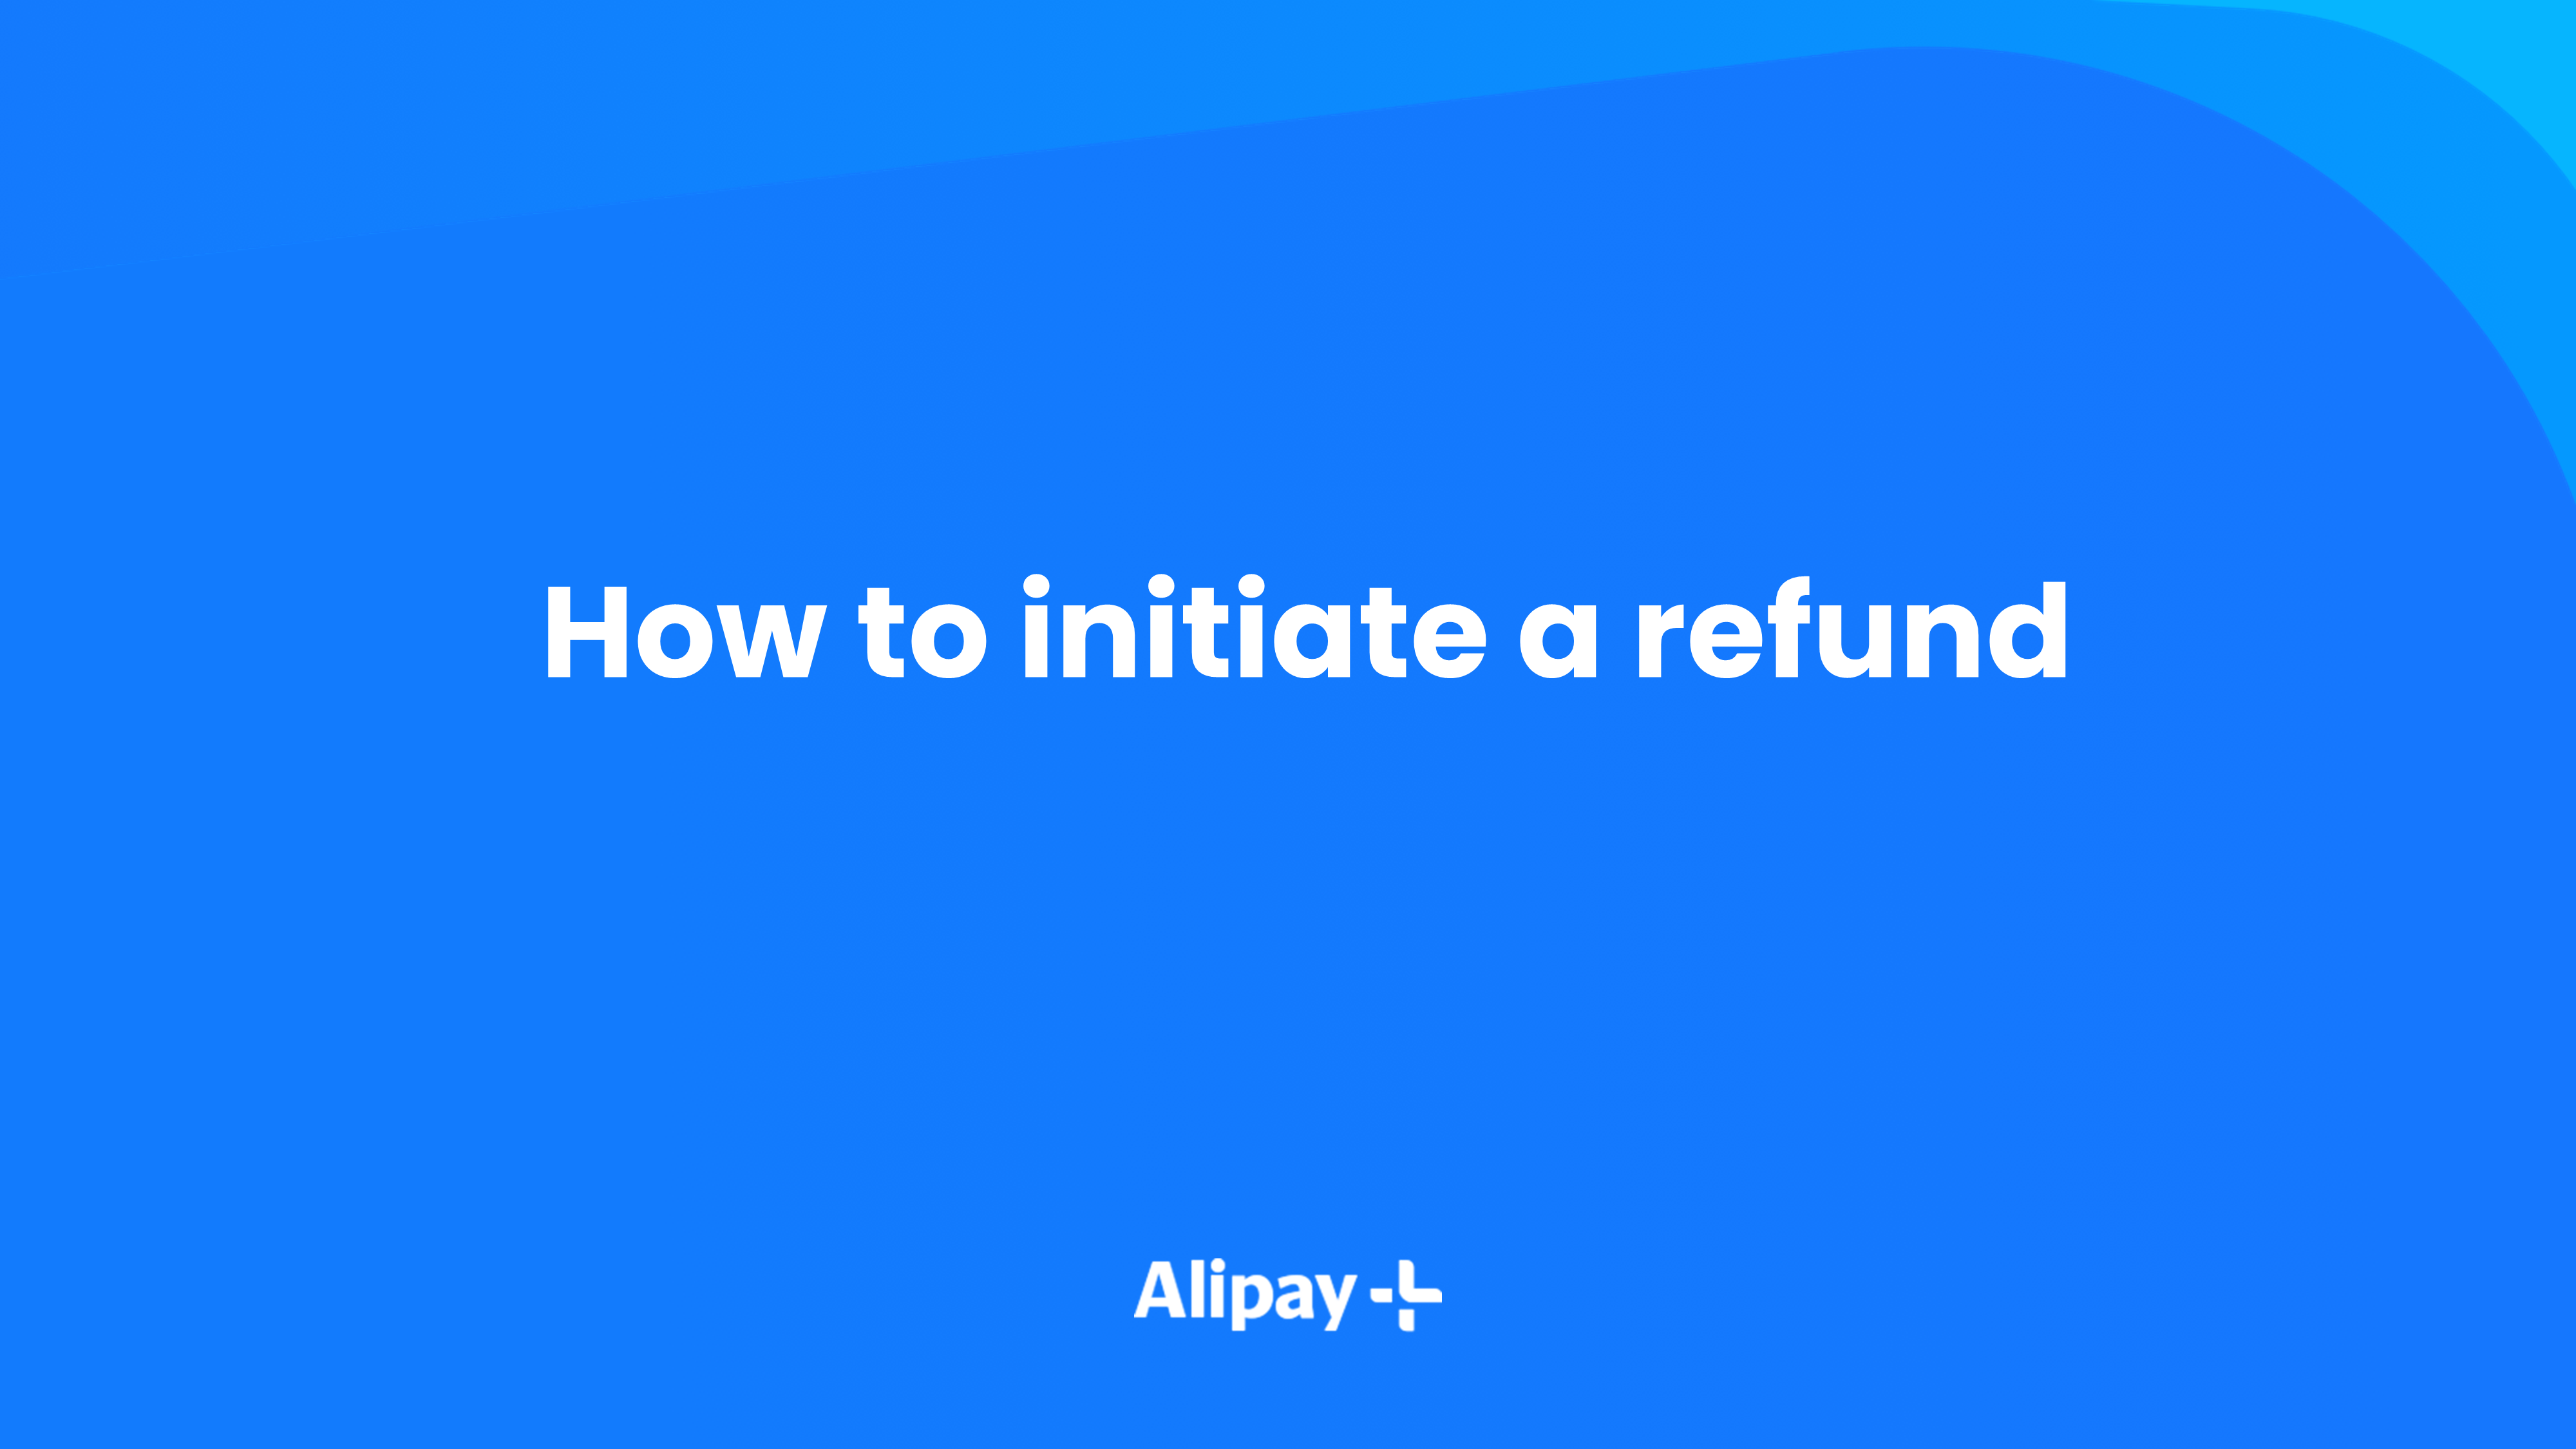 How to initiate a refund